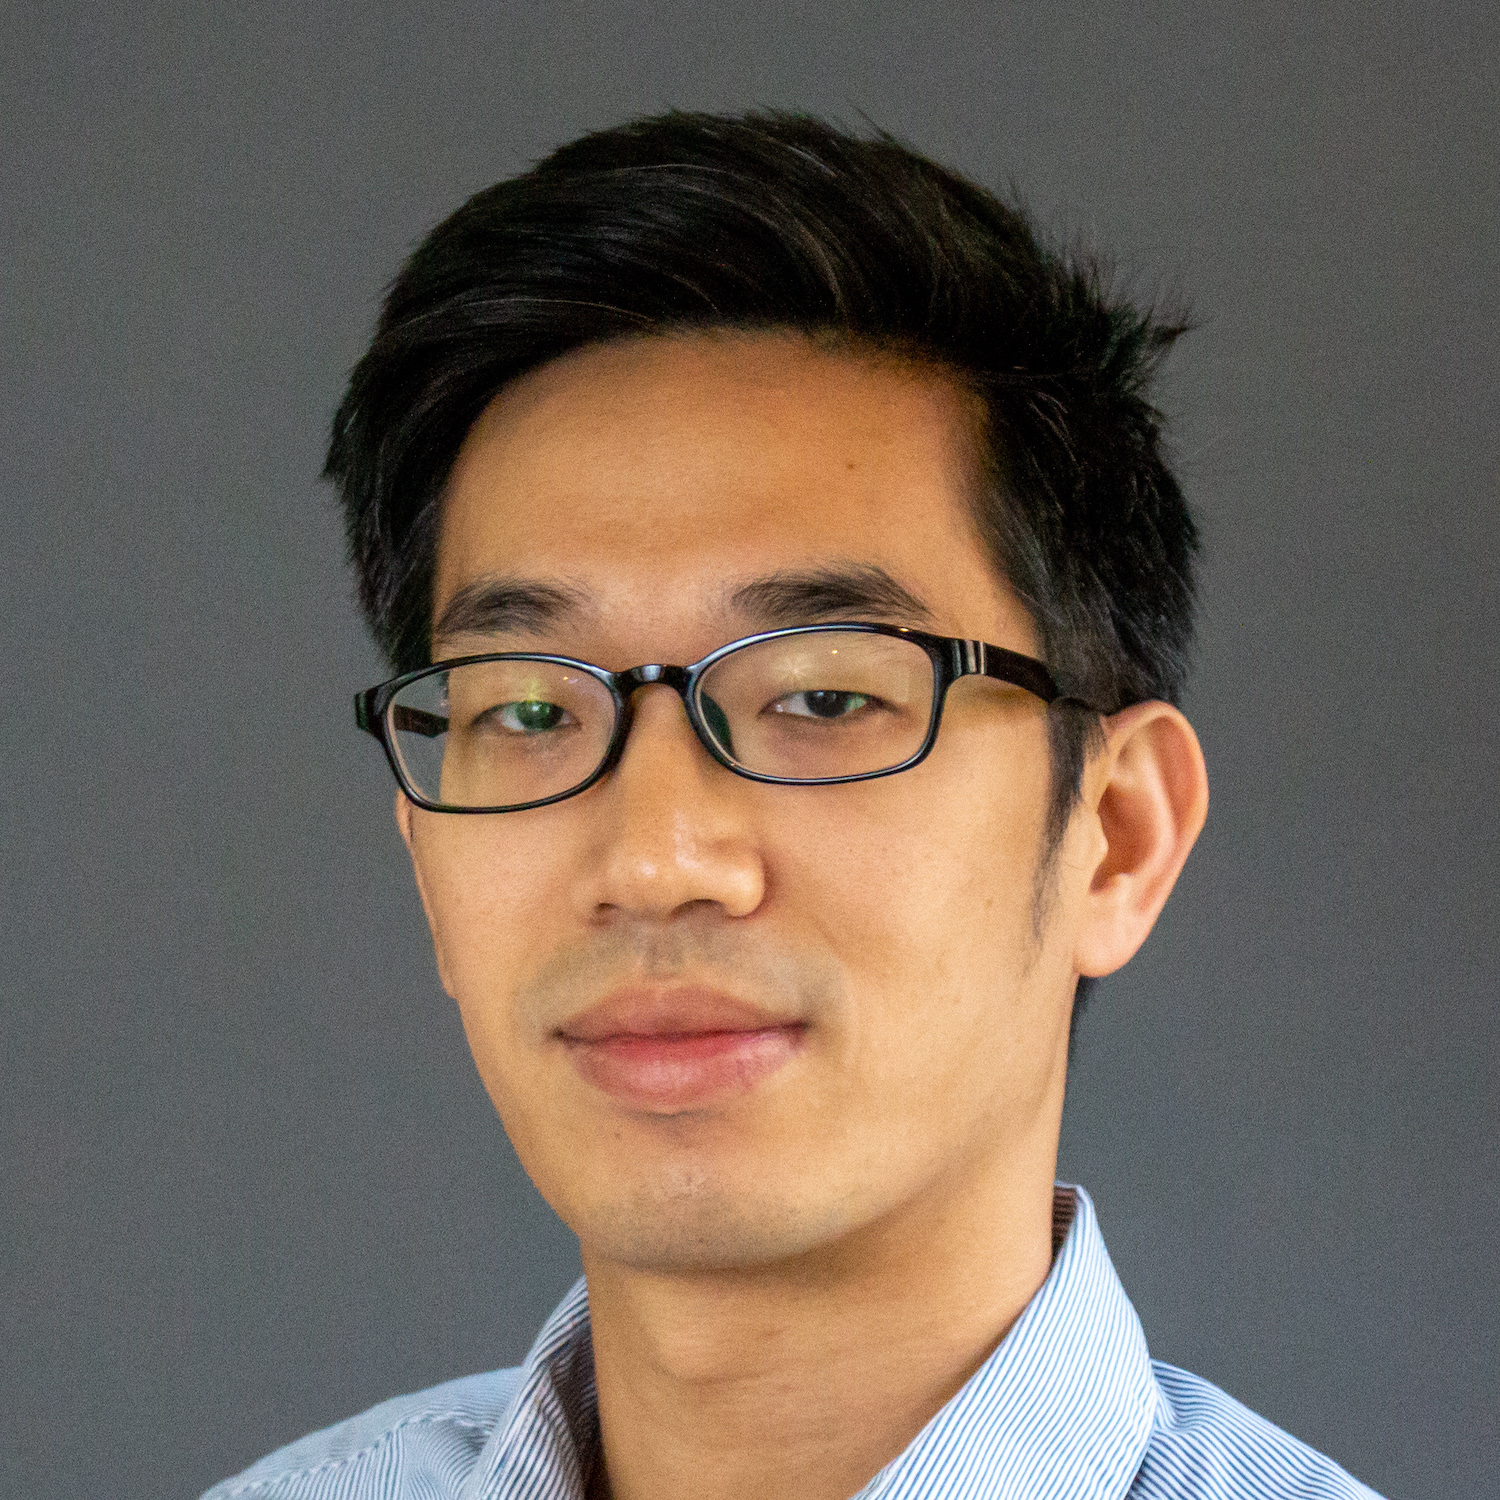 Brian Hsu looking at the camera with black rectangular glasses in a light blue collared shirt against a gray background.